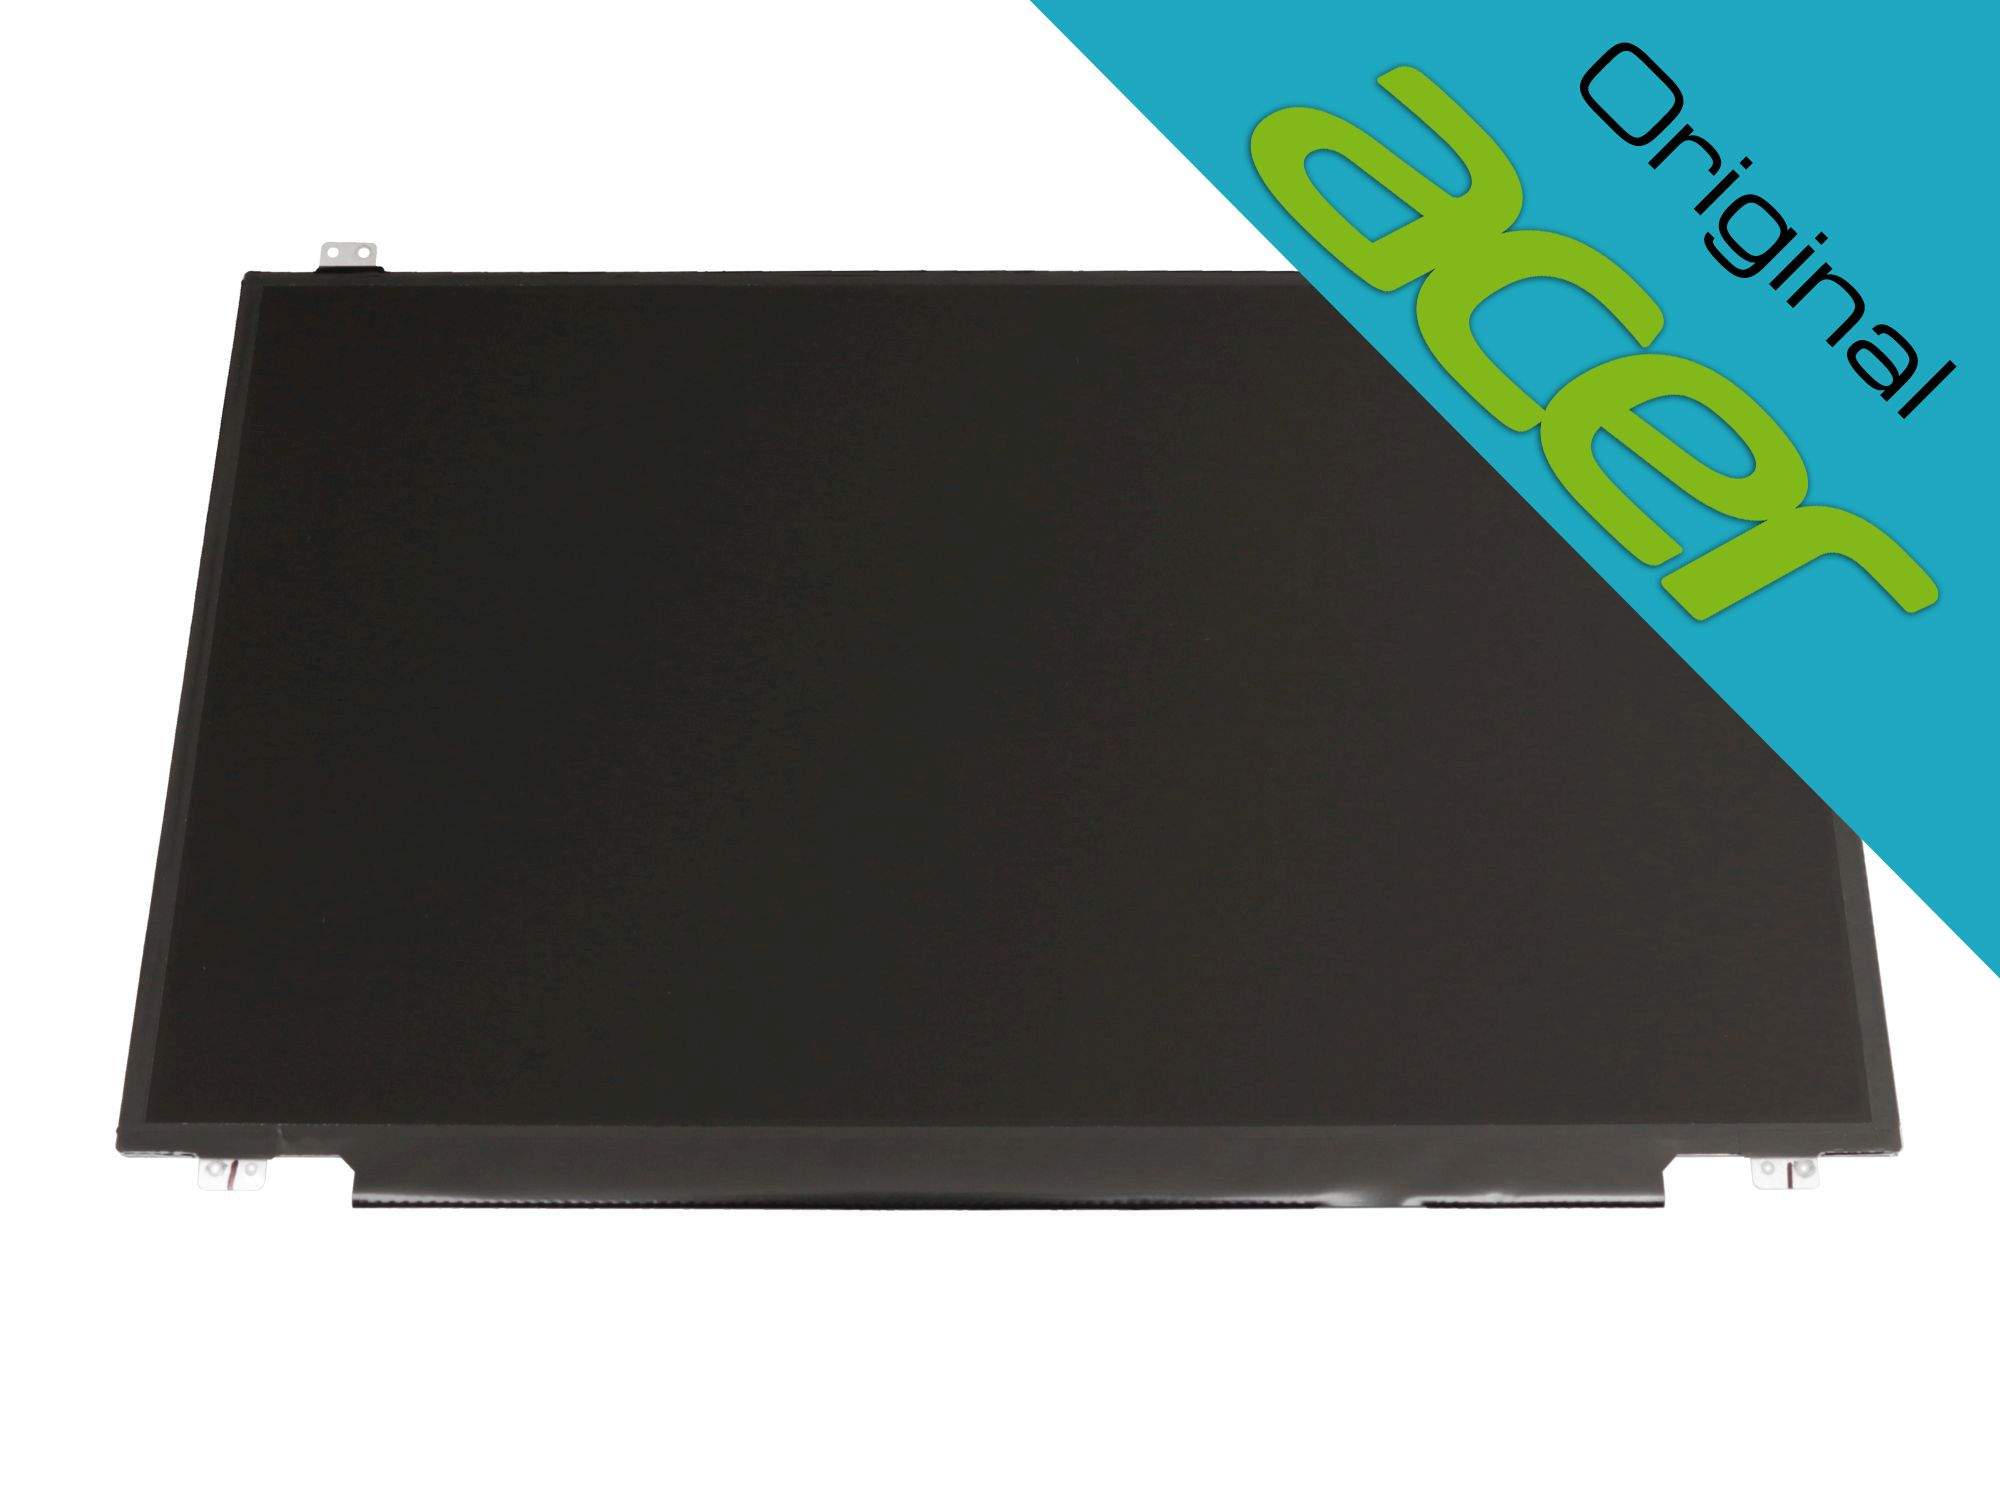 ACER LCD Panel Led 17 3 Inch Fhd